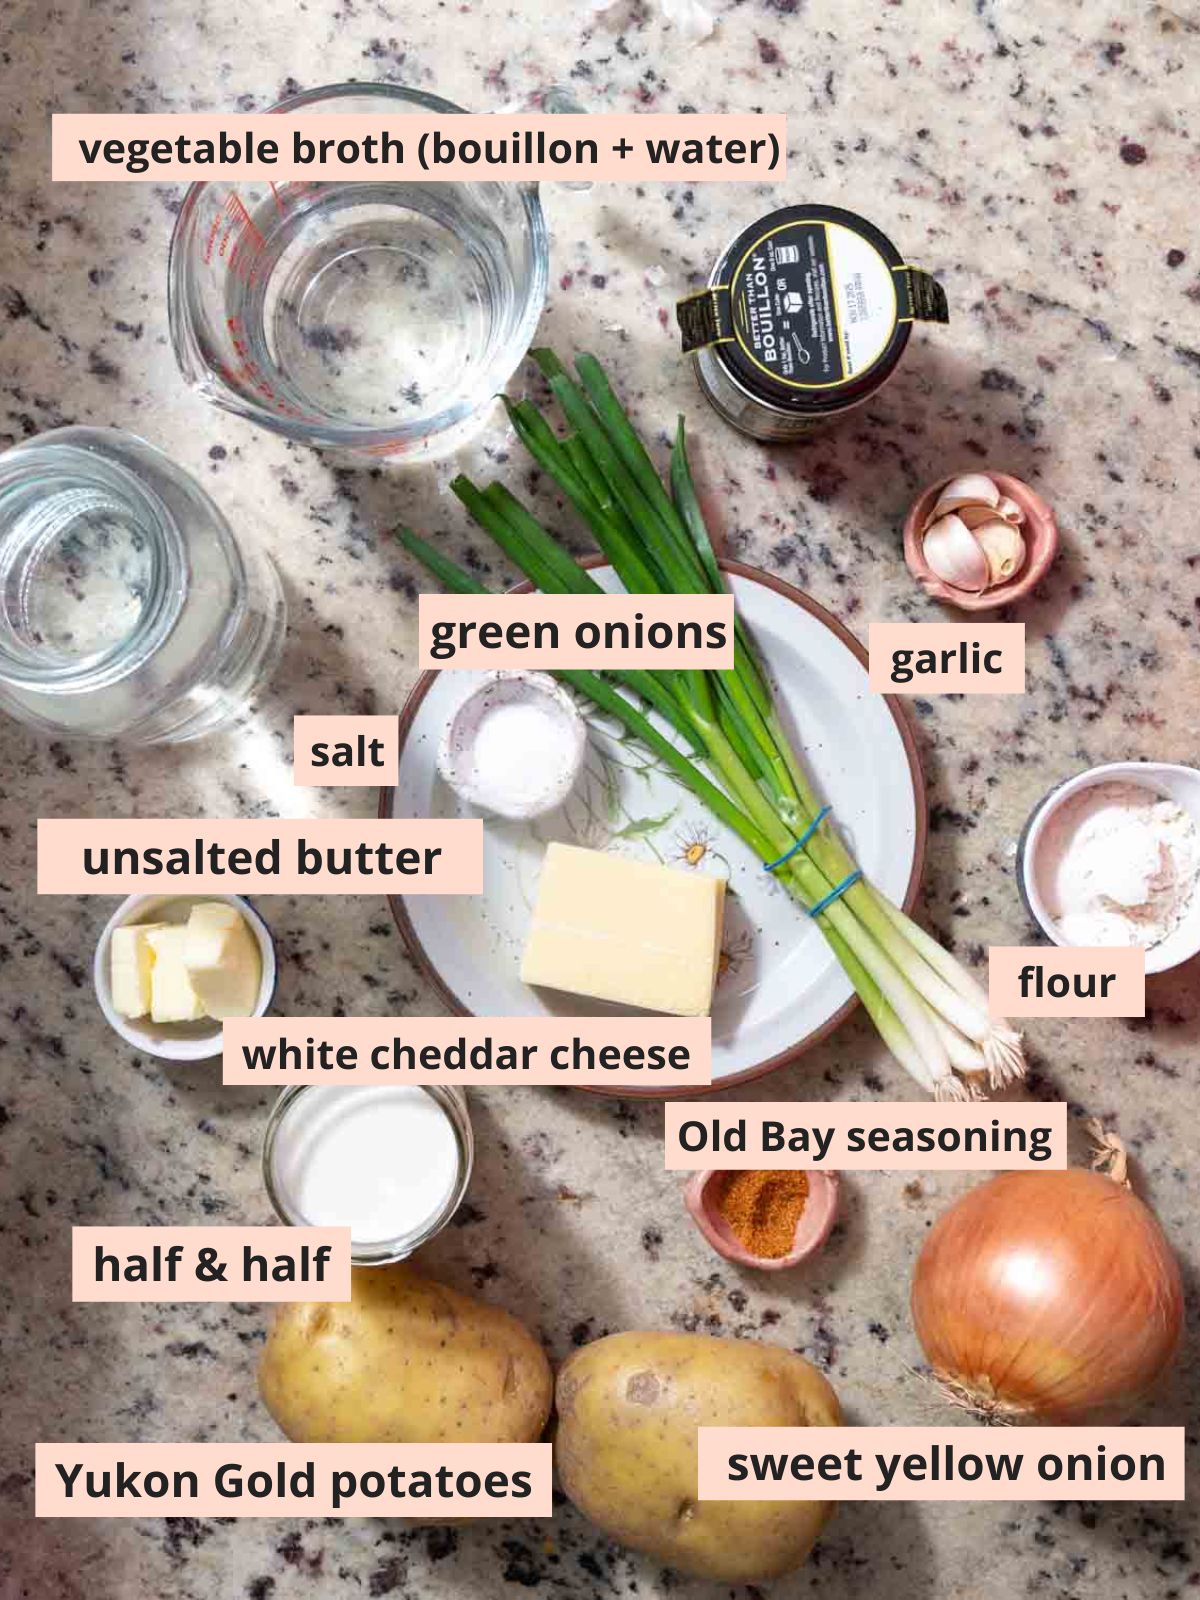 Labeled soup ingredients.